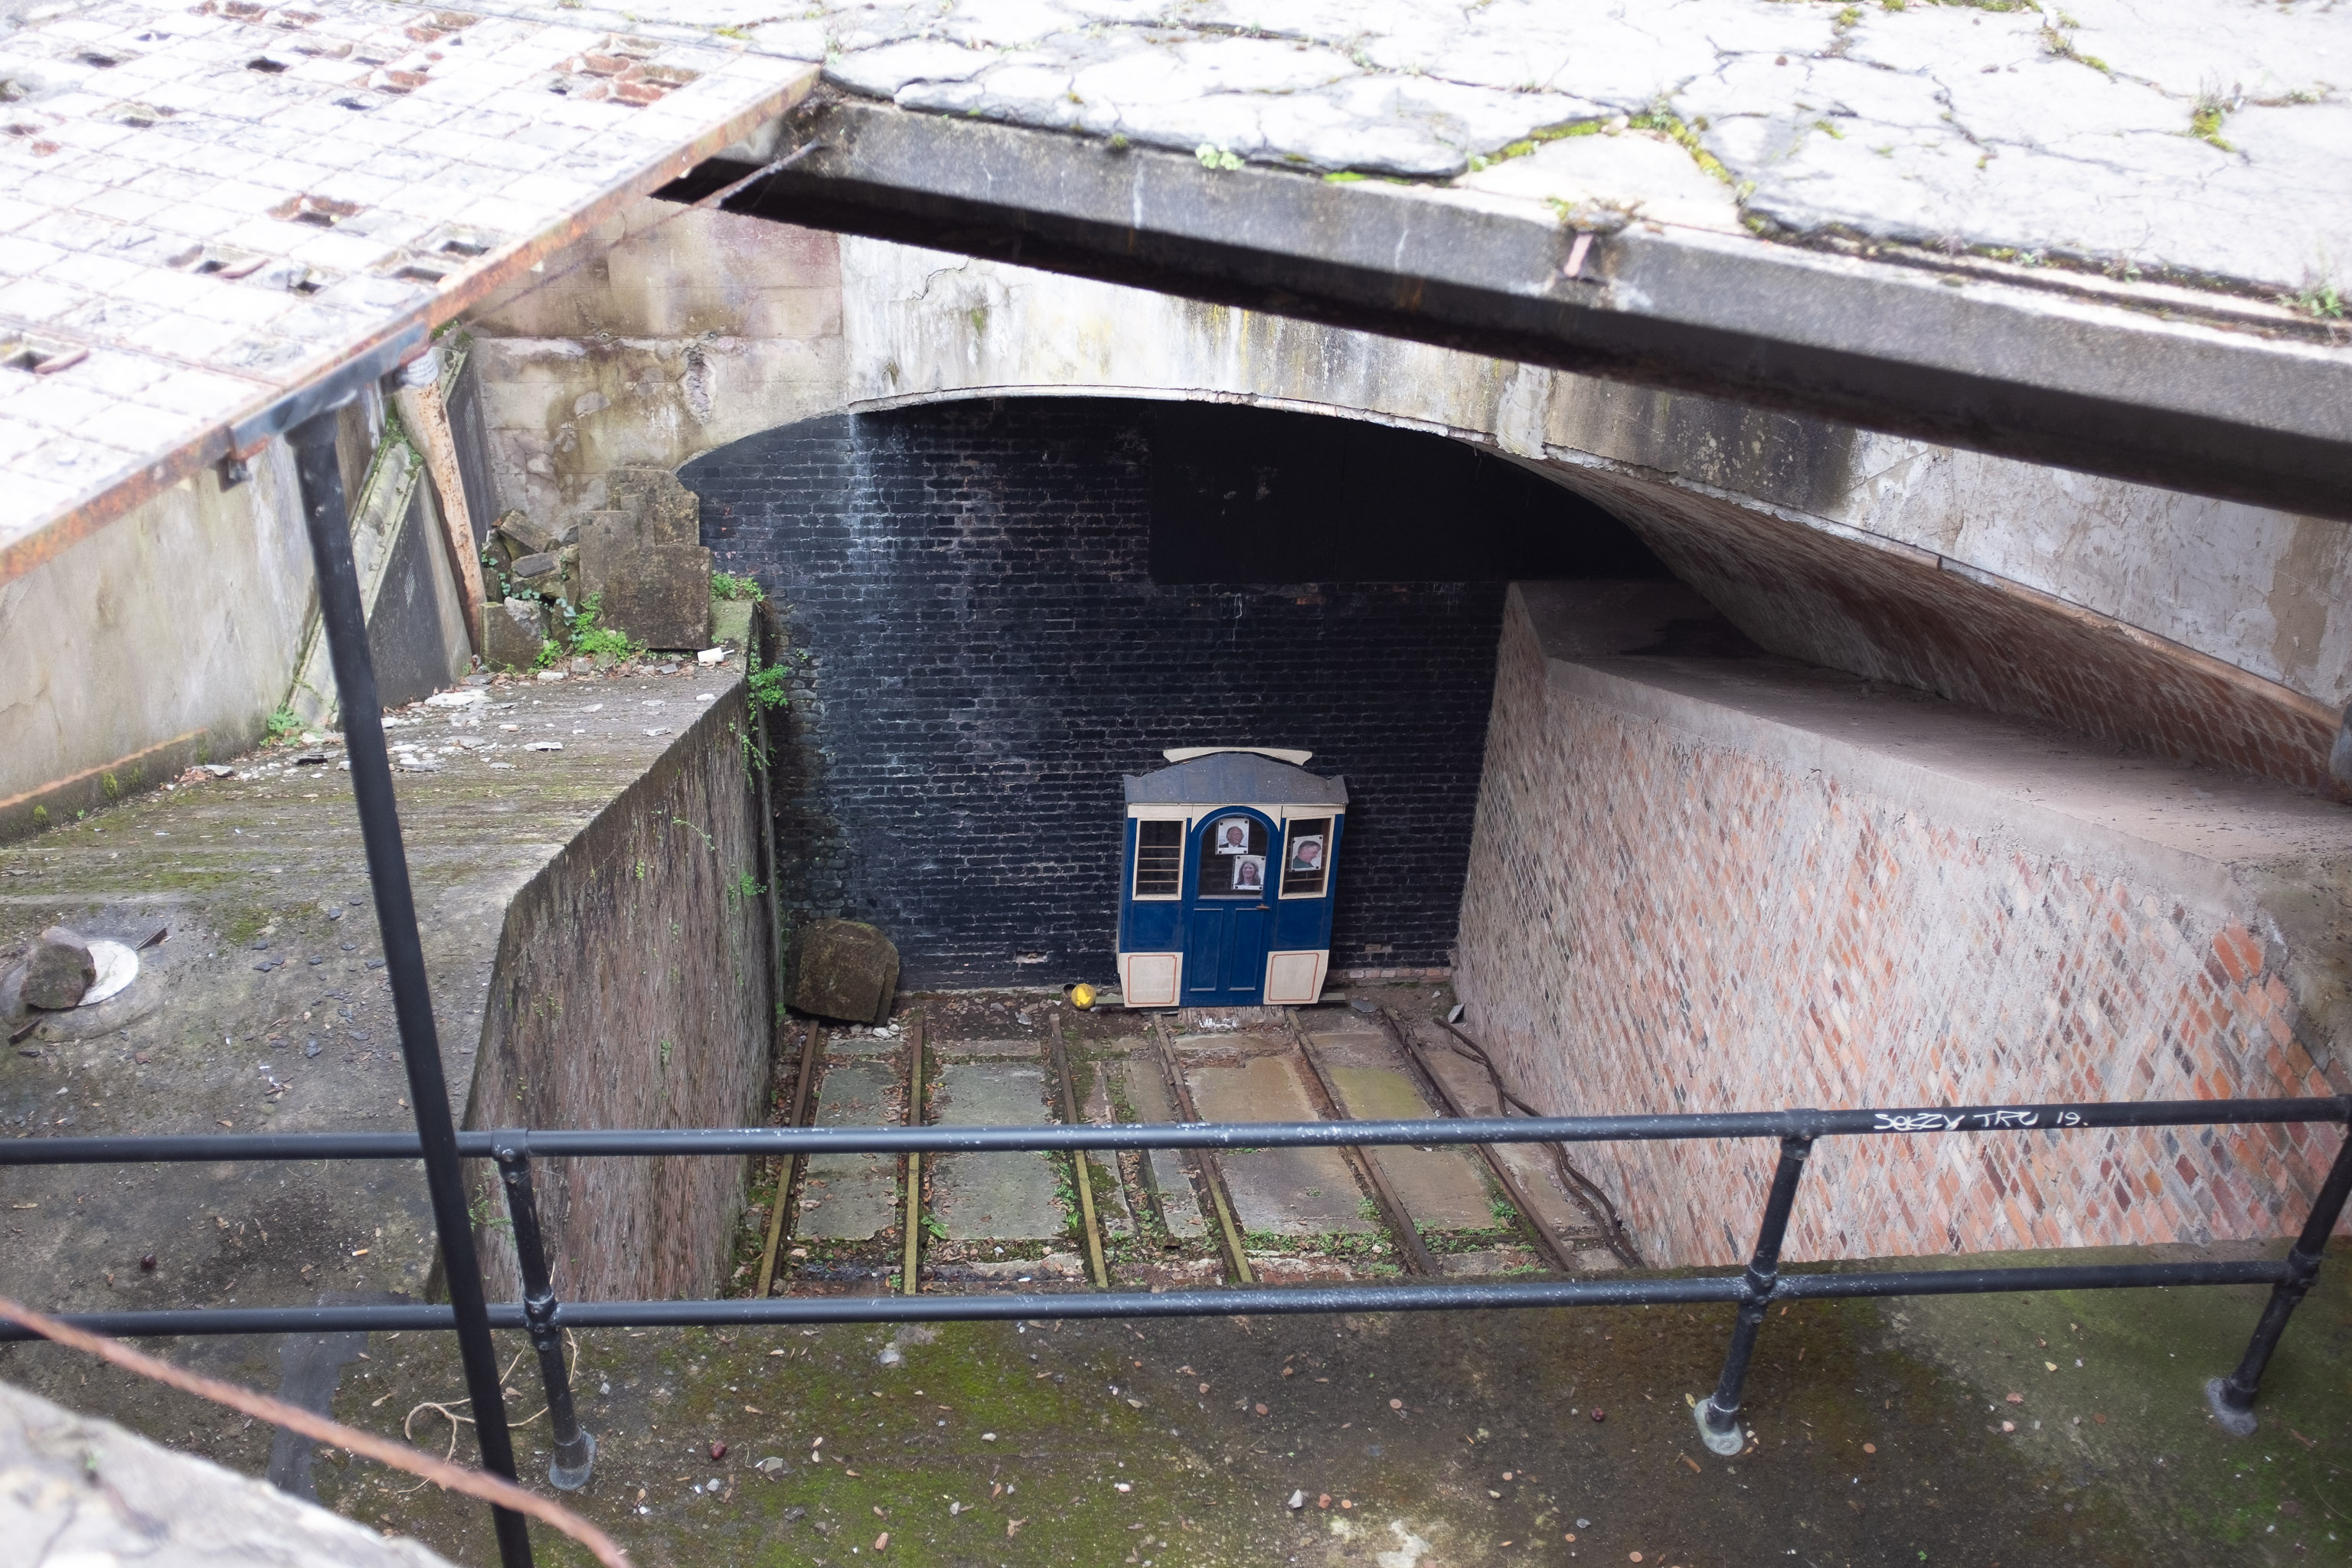 Funicular Fakery
The nice folk who look after the Clifton Rocks Railway have an example of what one of the carriages would look like at the top, though the tunnel h...